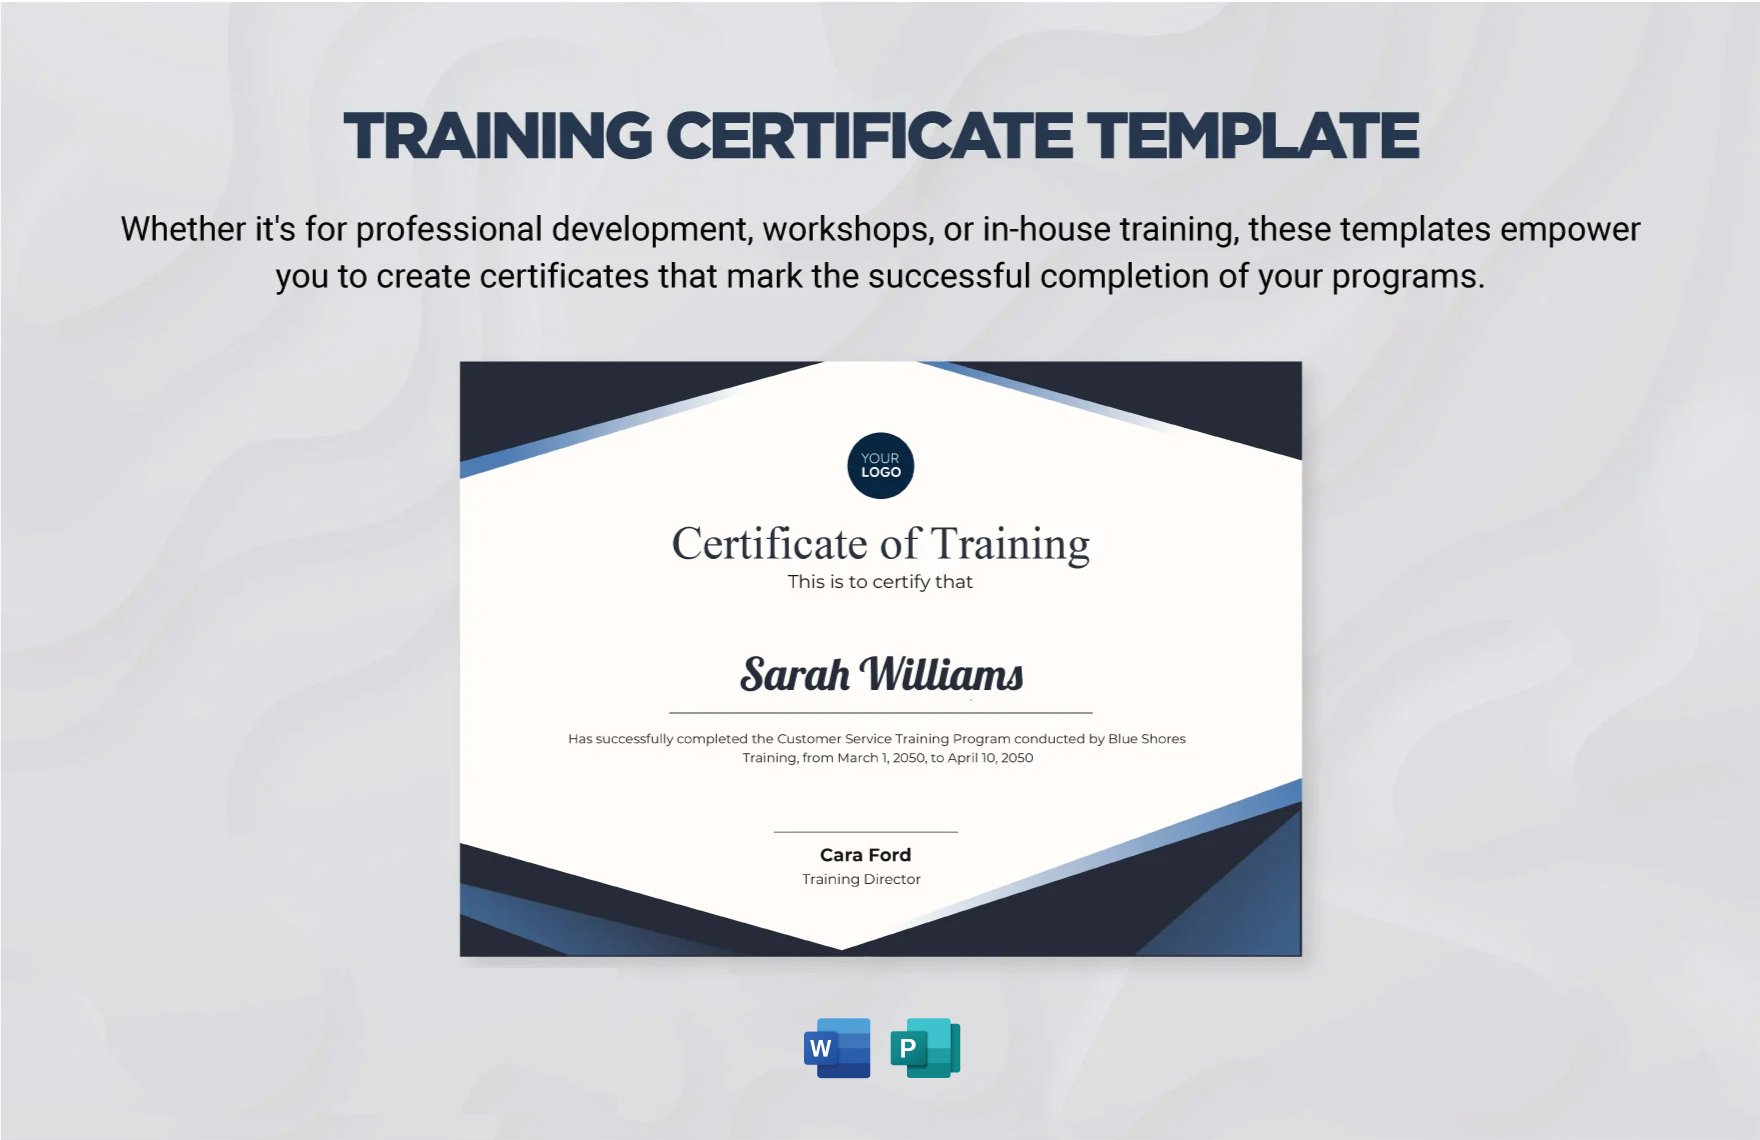 Training Certificate Template in Word, Publisher